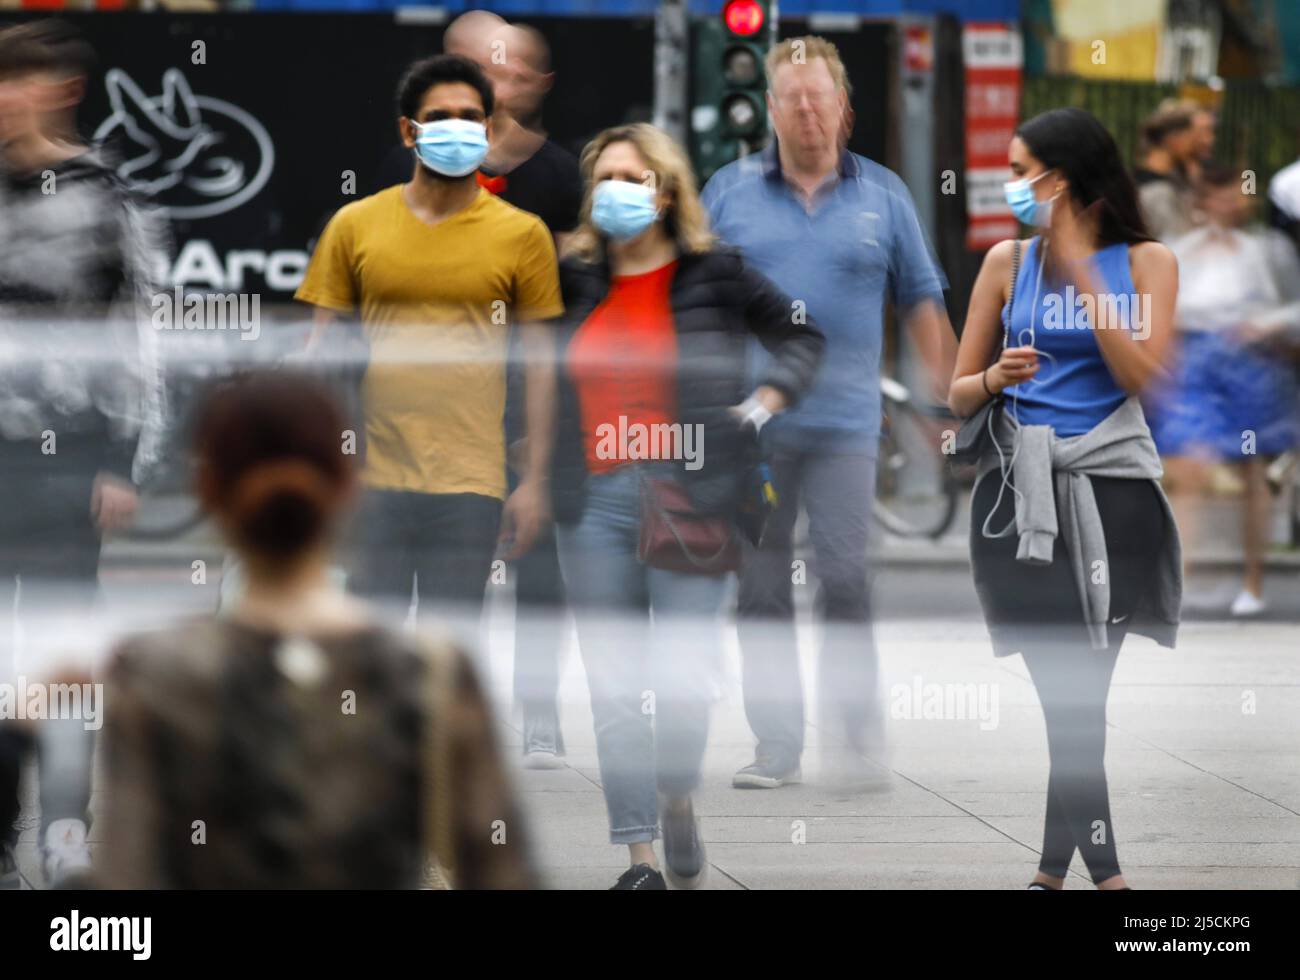 Berlin, DEU, 22.05.2020 - Dense crowd around Alexanderplatz. People with masks. Difficult to keep the distance rule. Do not infect. Germany is slowly opening up again. Shops, cafes, restaurants, shopping centers may now be open again. [automated translation] Stock Photo